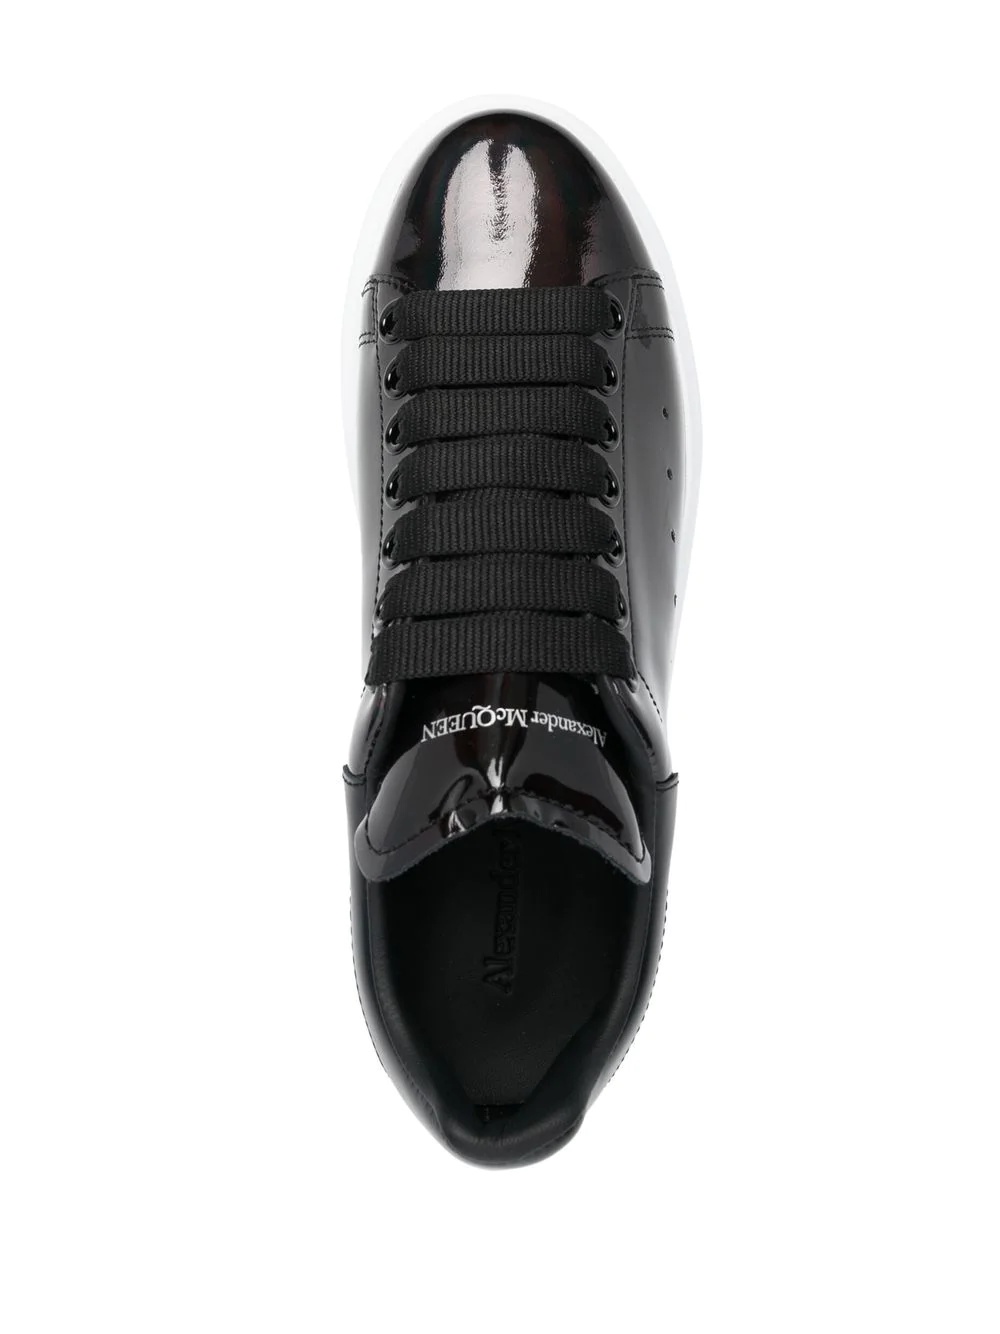 patent-leather low-top sneakers - 5